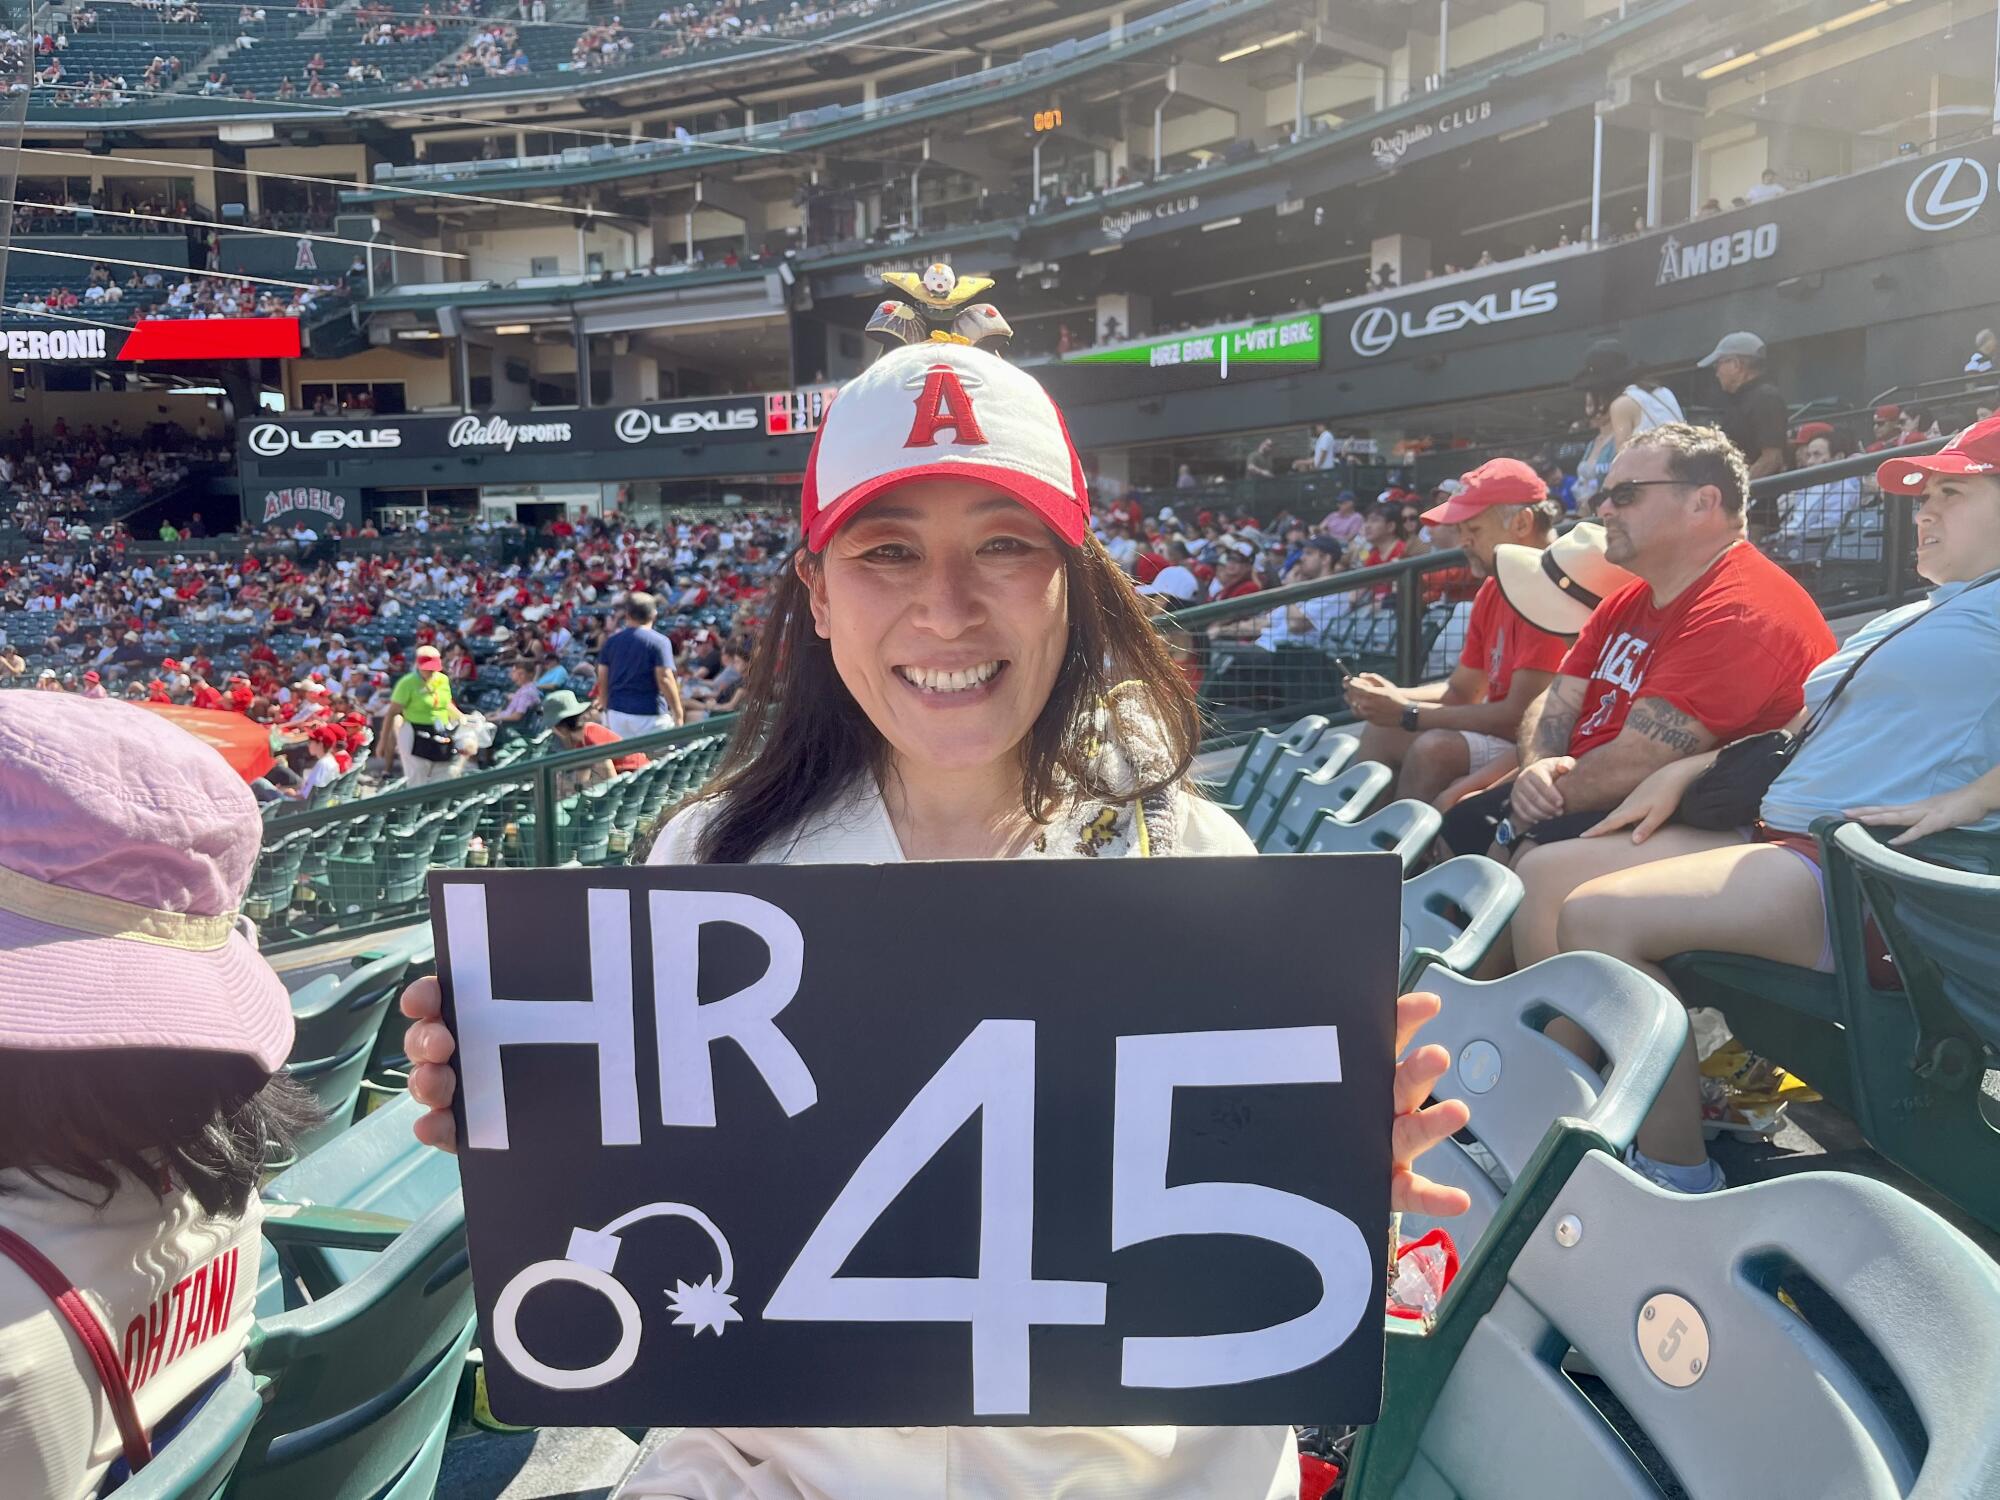 Yuka Yonetani, a Shohei Ohtani fan from Japan, sits in the stands at Angel Stadium during an Angels-Orioles game on Sept. 10.